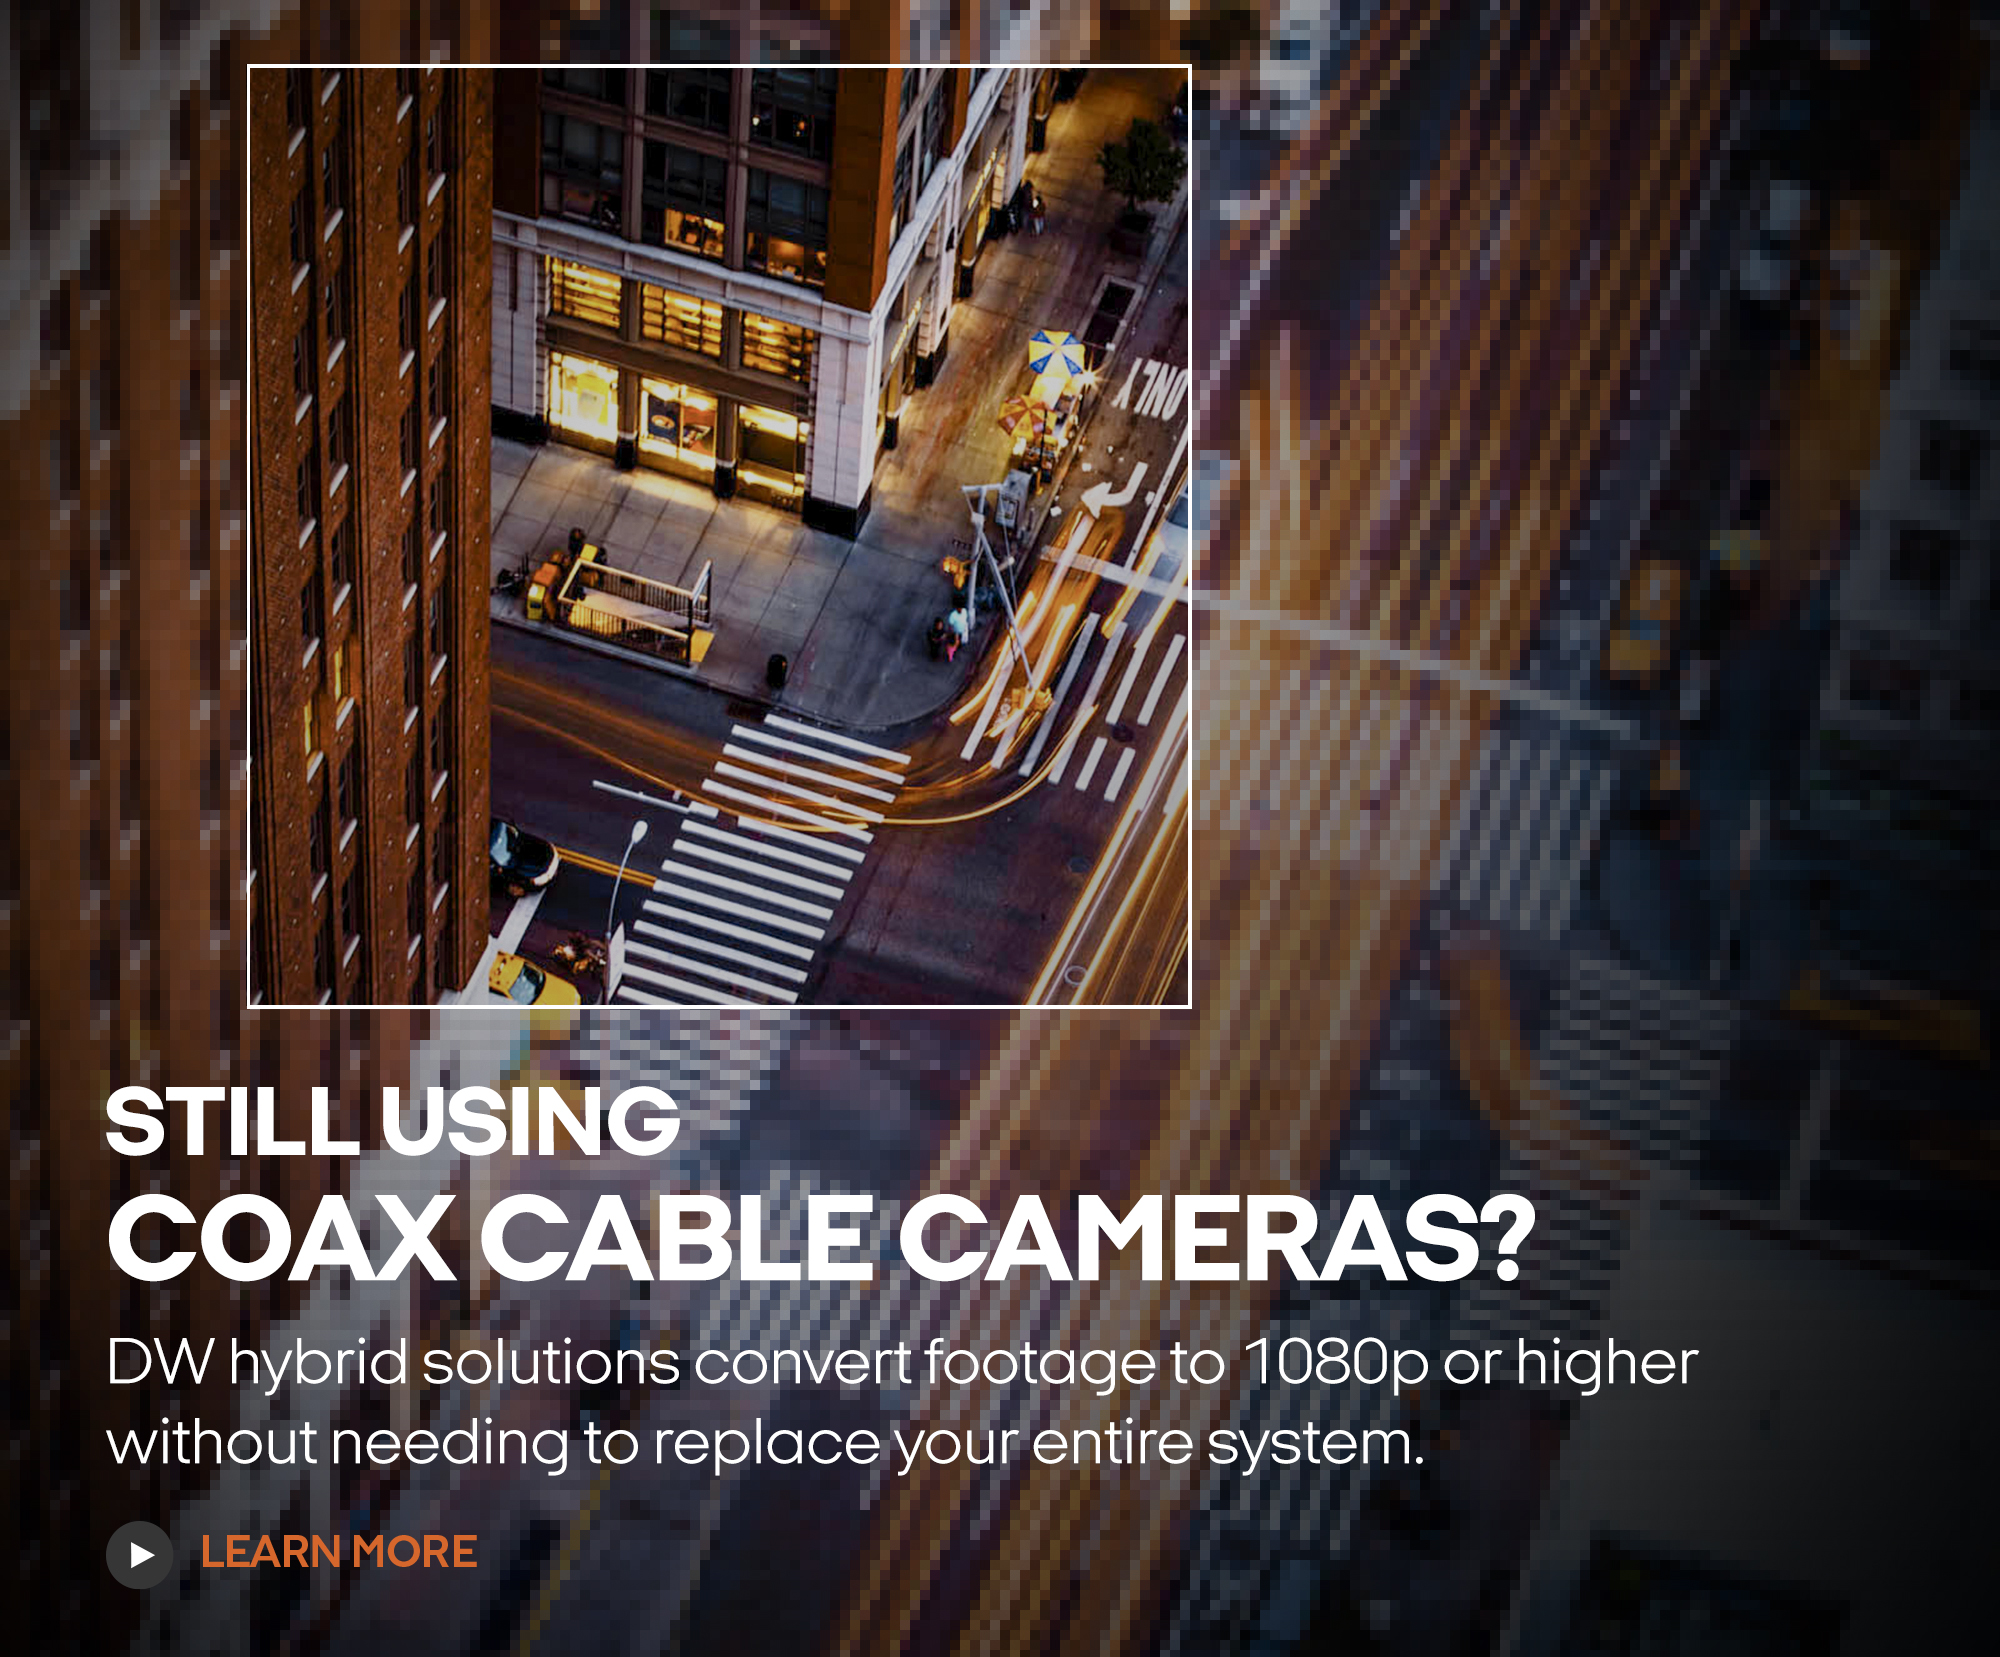 What Are IP Cameras and How Do They Work? - Bay Alarm